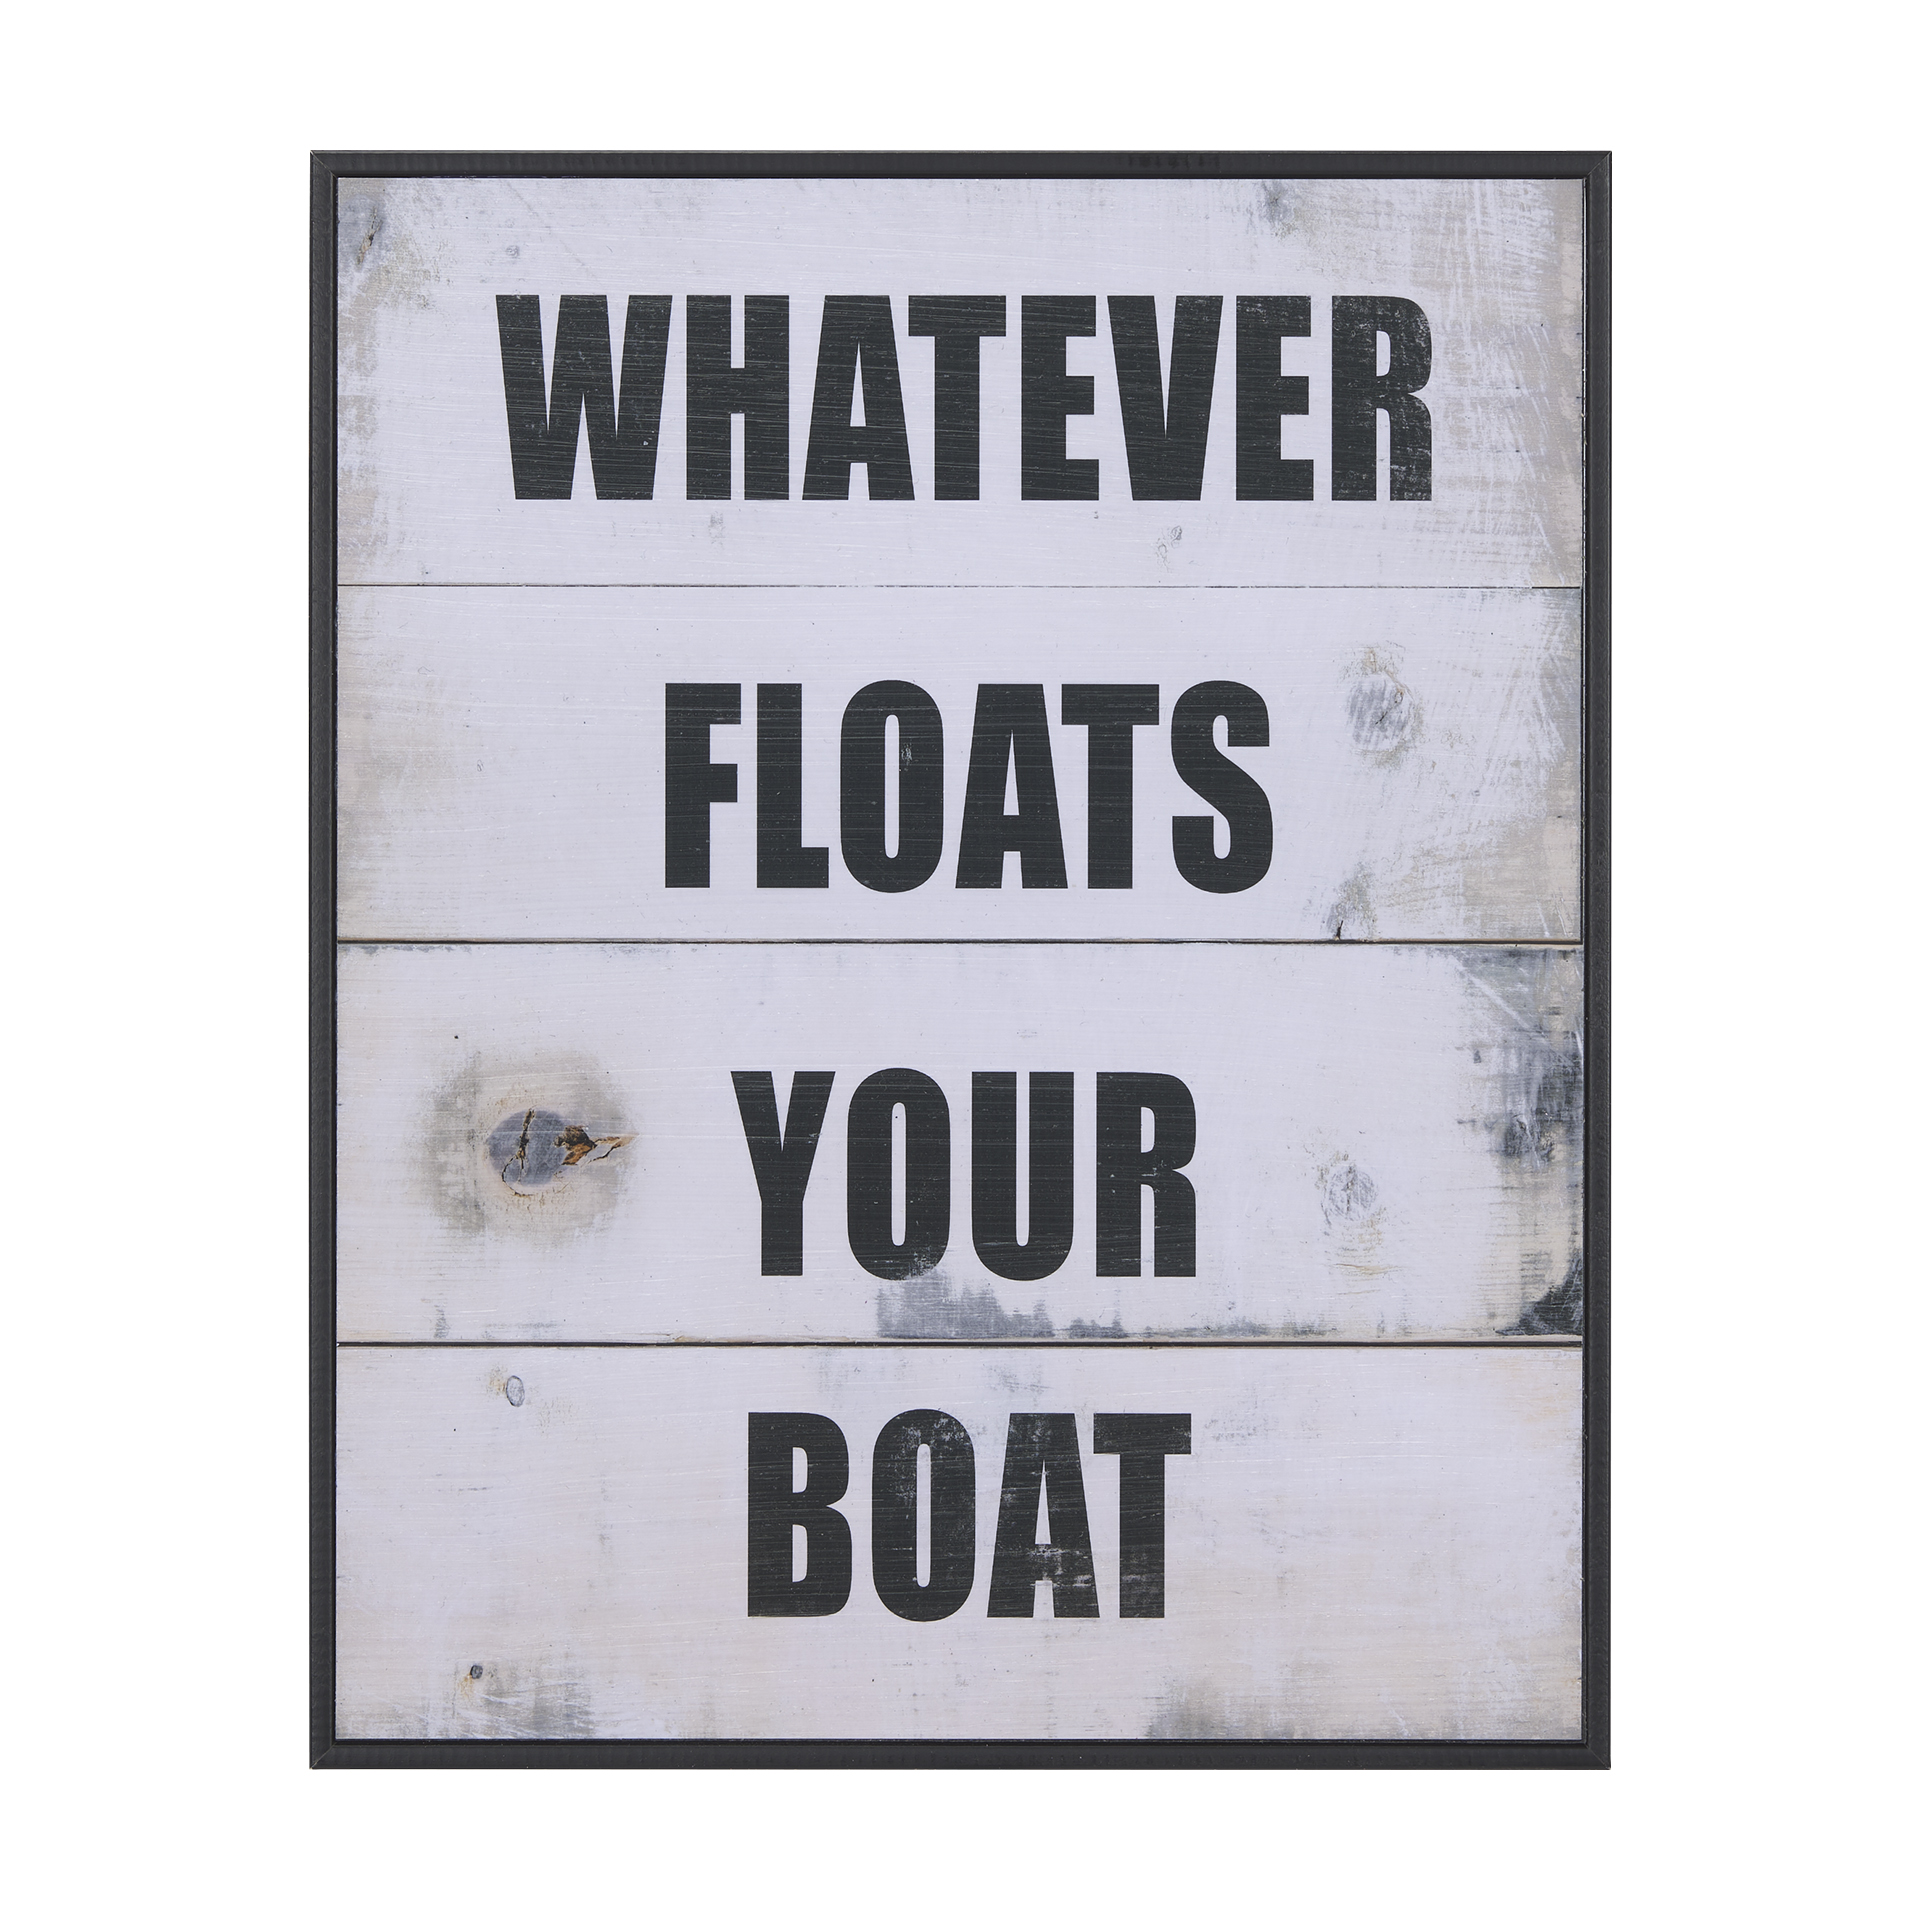 Float Your Boat (16 x 20)